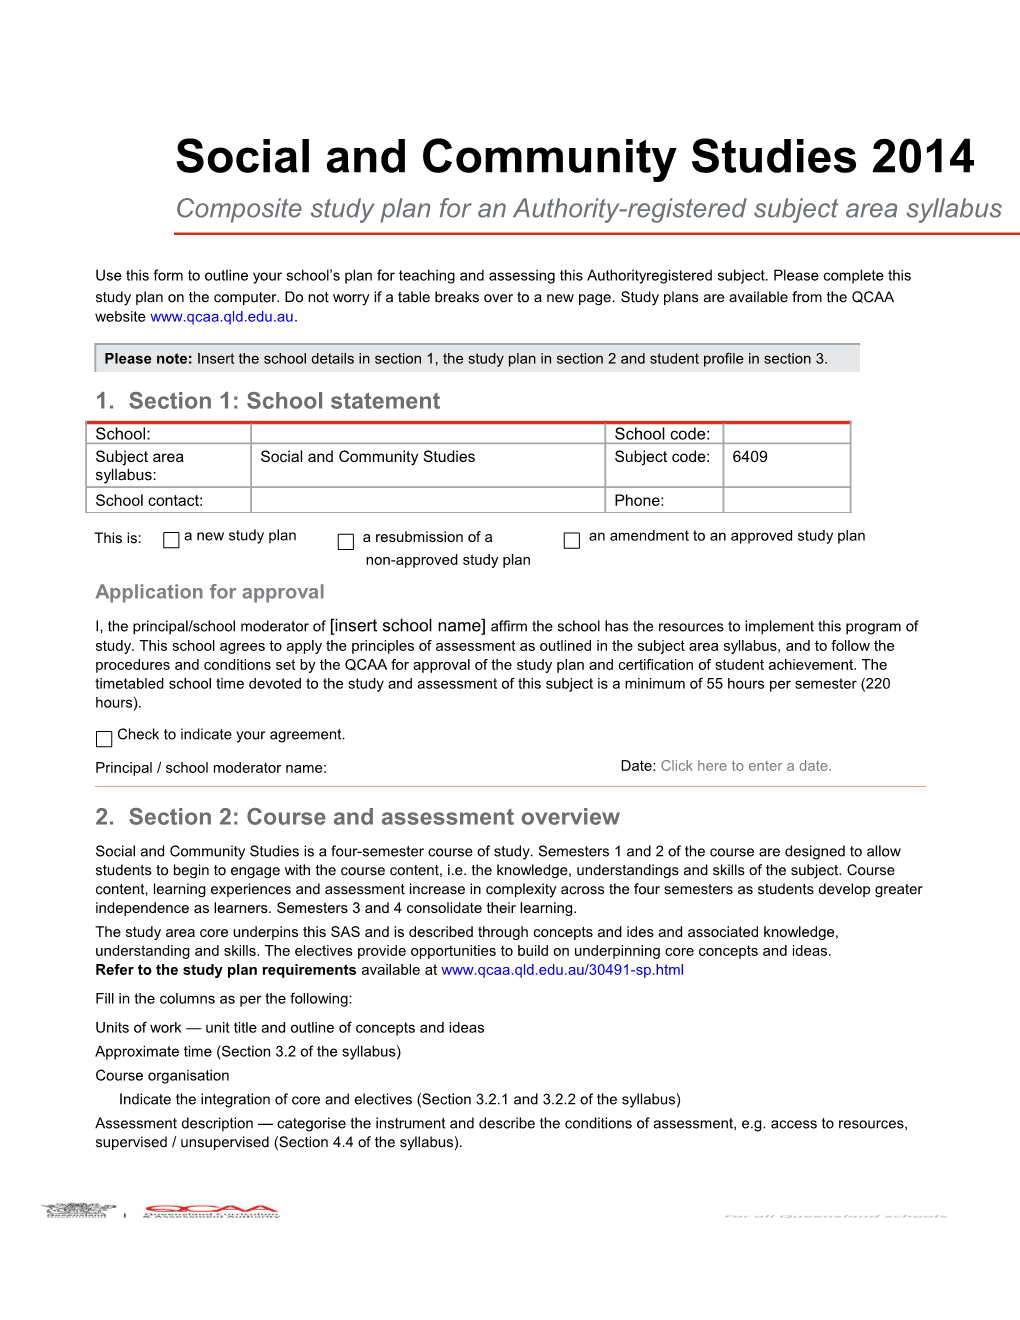 Composite Study Plan Template for the Social and Community Studies (2014) SAS